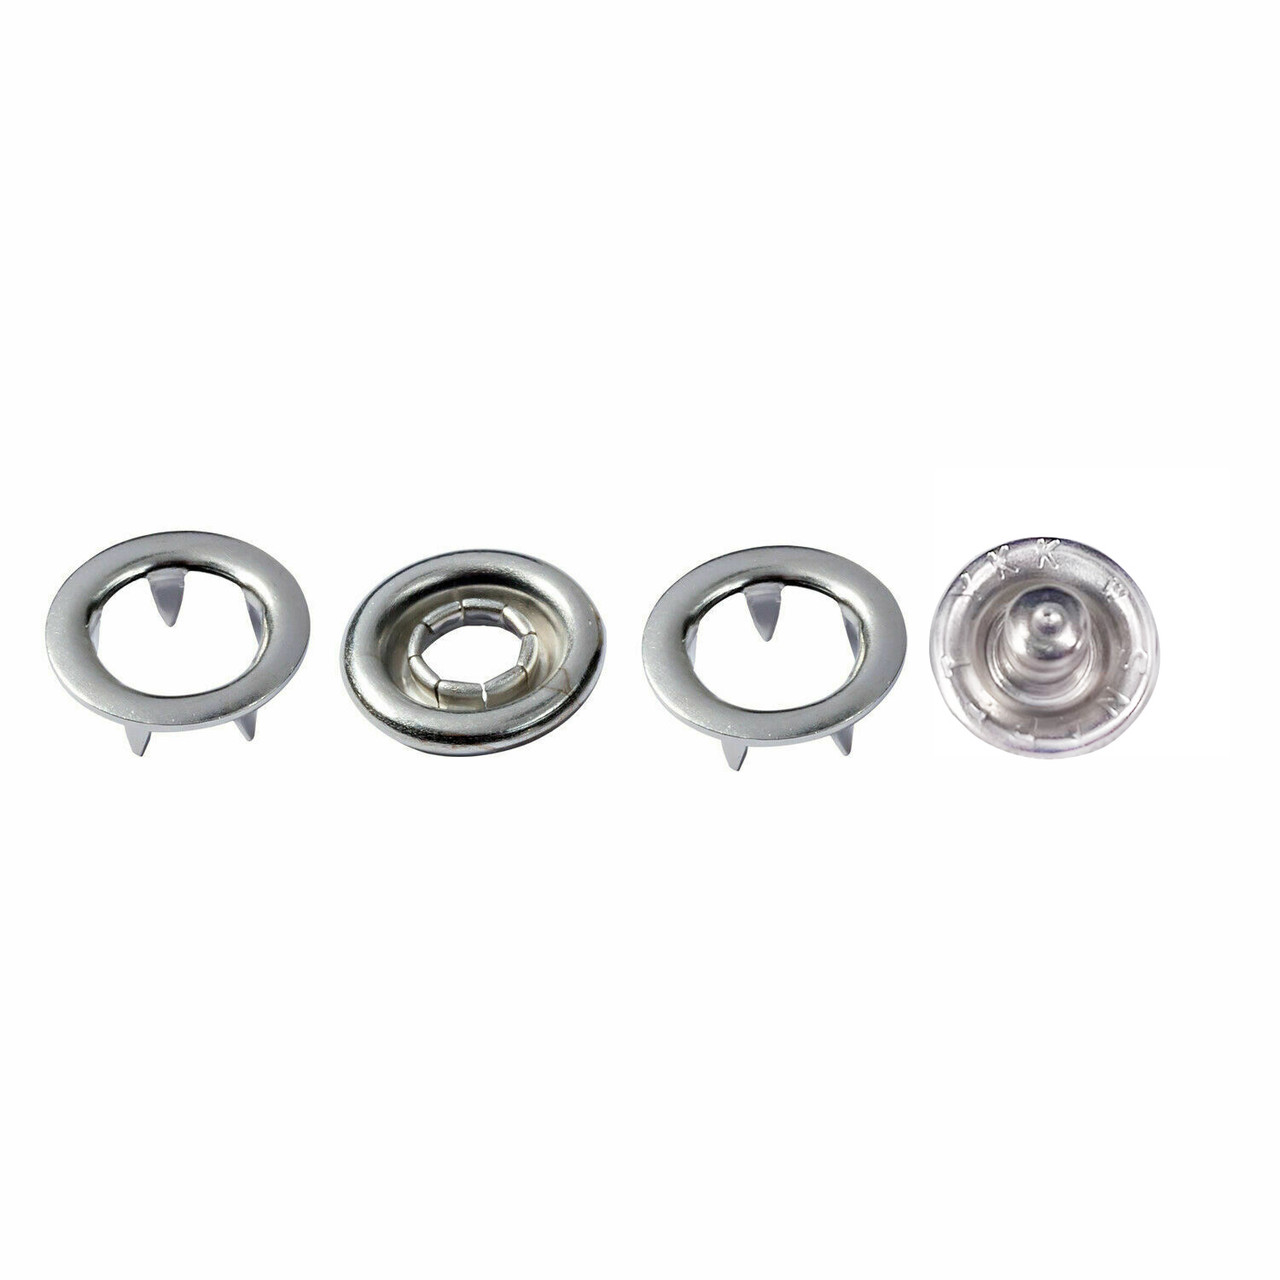 YKK Prong Ring Snap Poppers (Pack of 10)